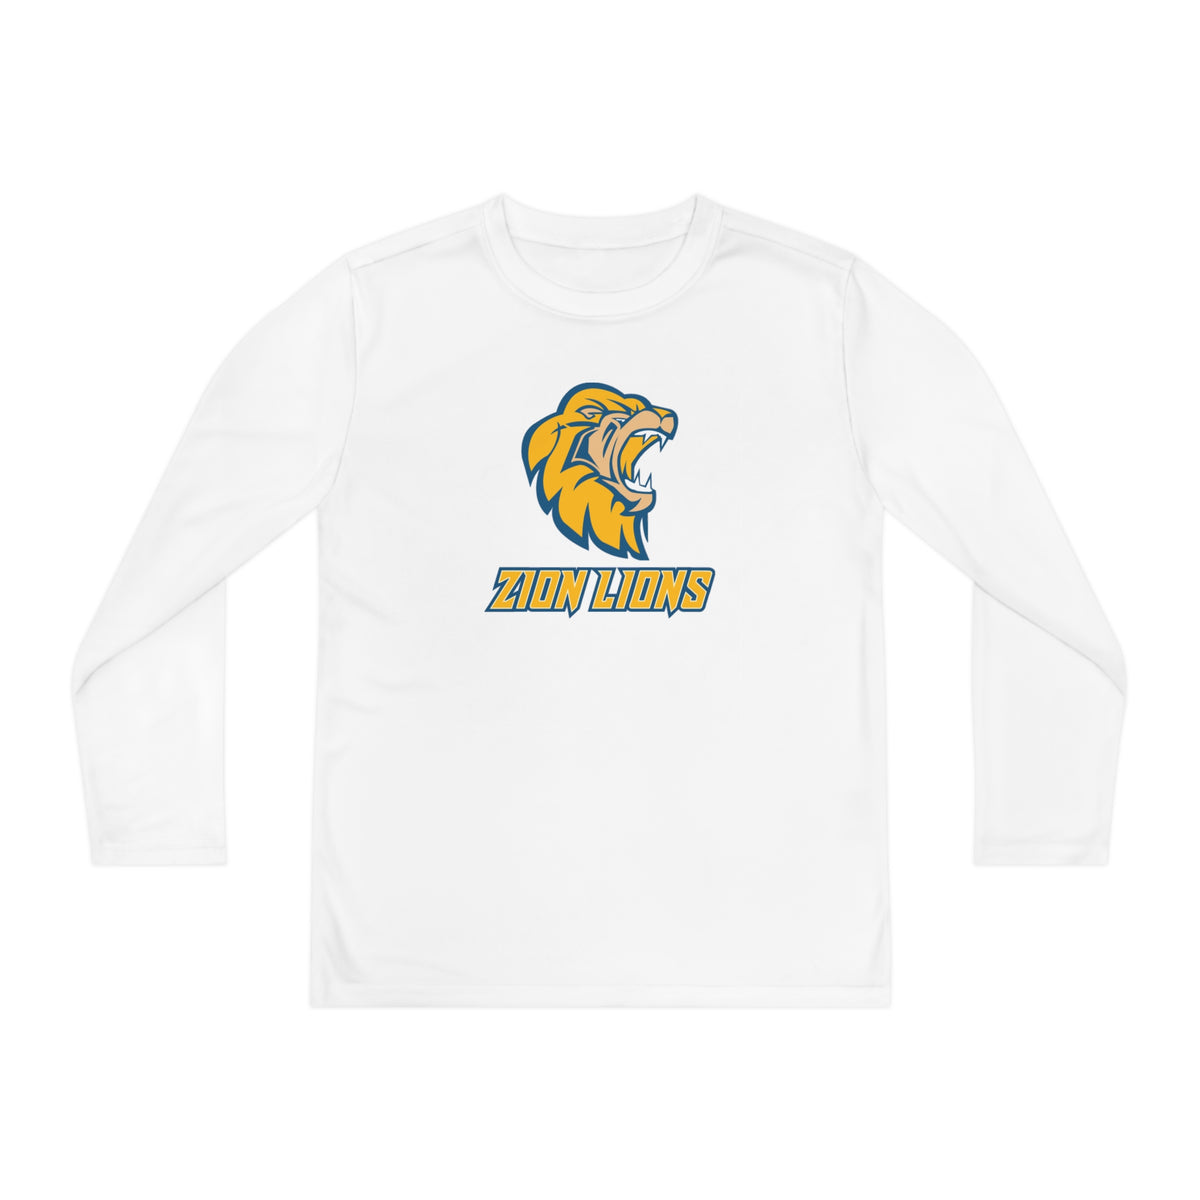 Zion Lions Youth Long Sleeve Competitor Tee